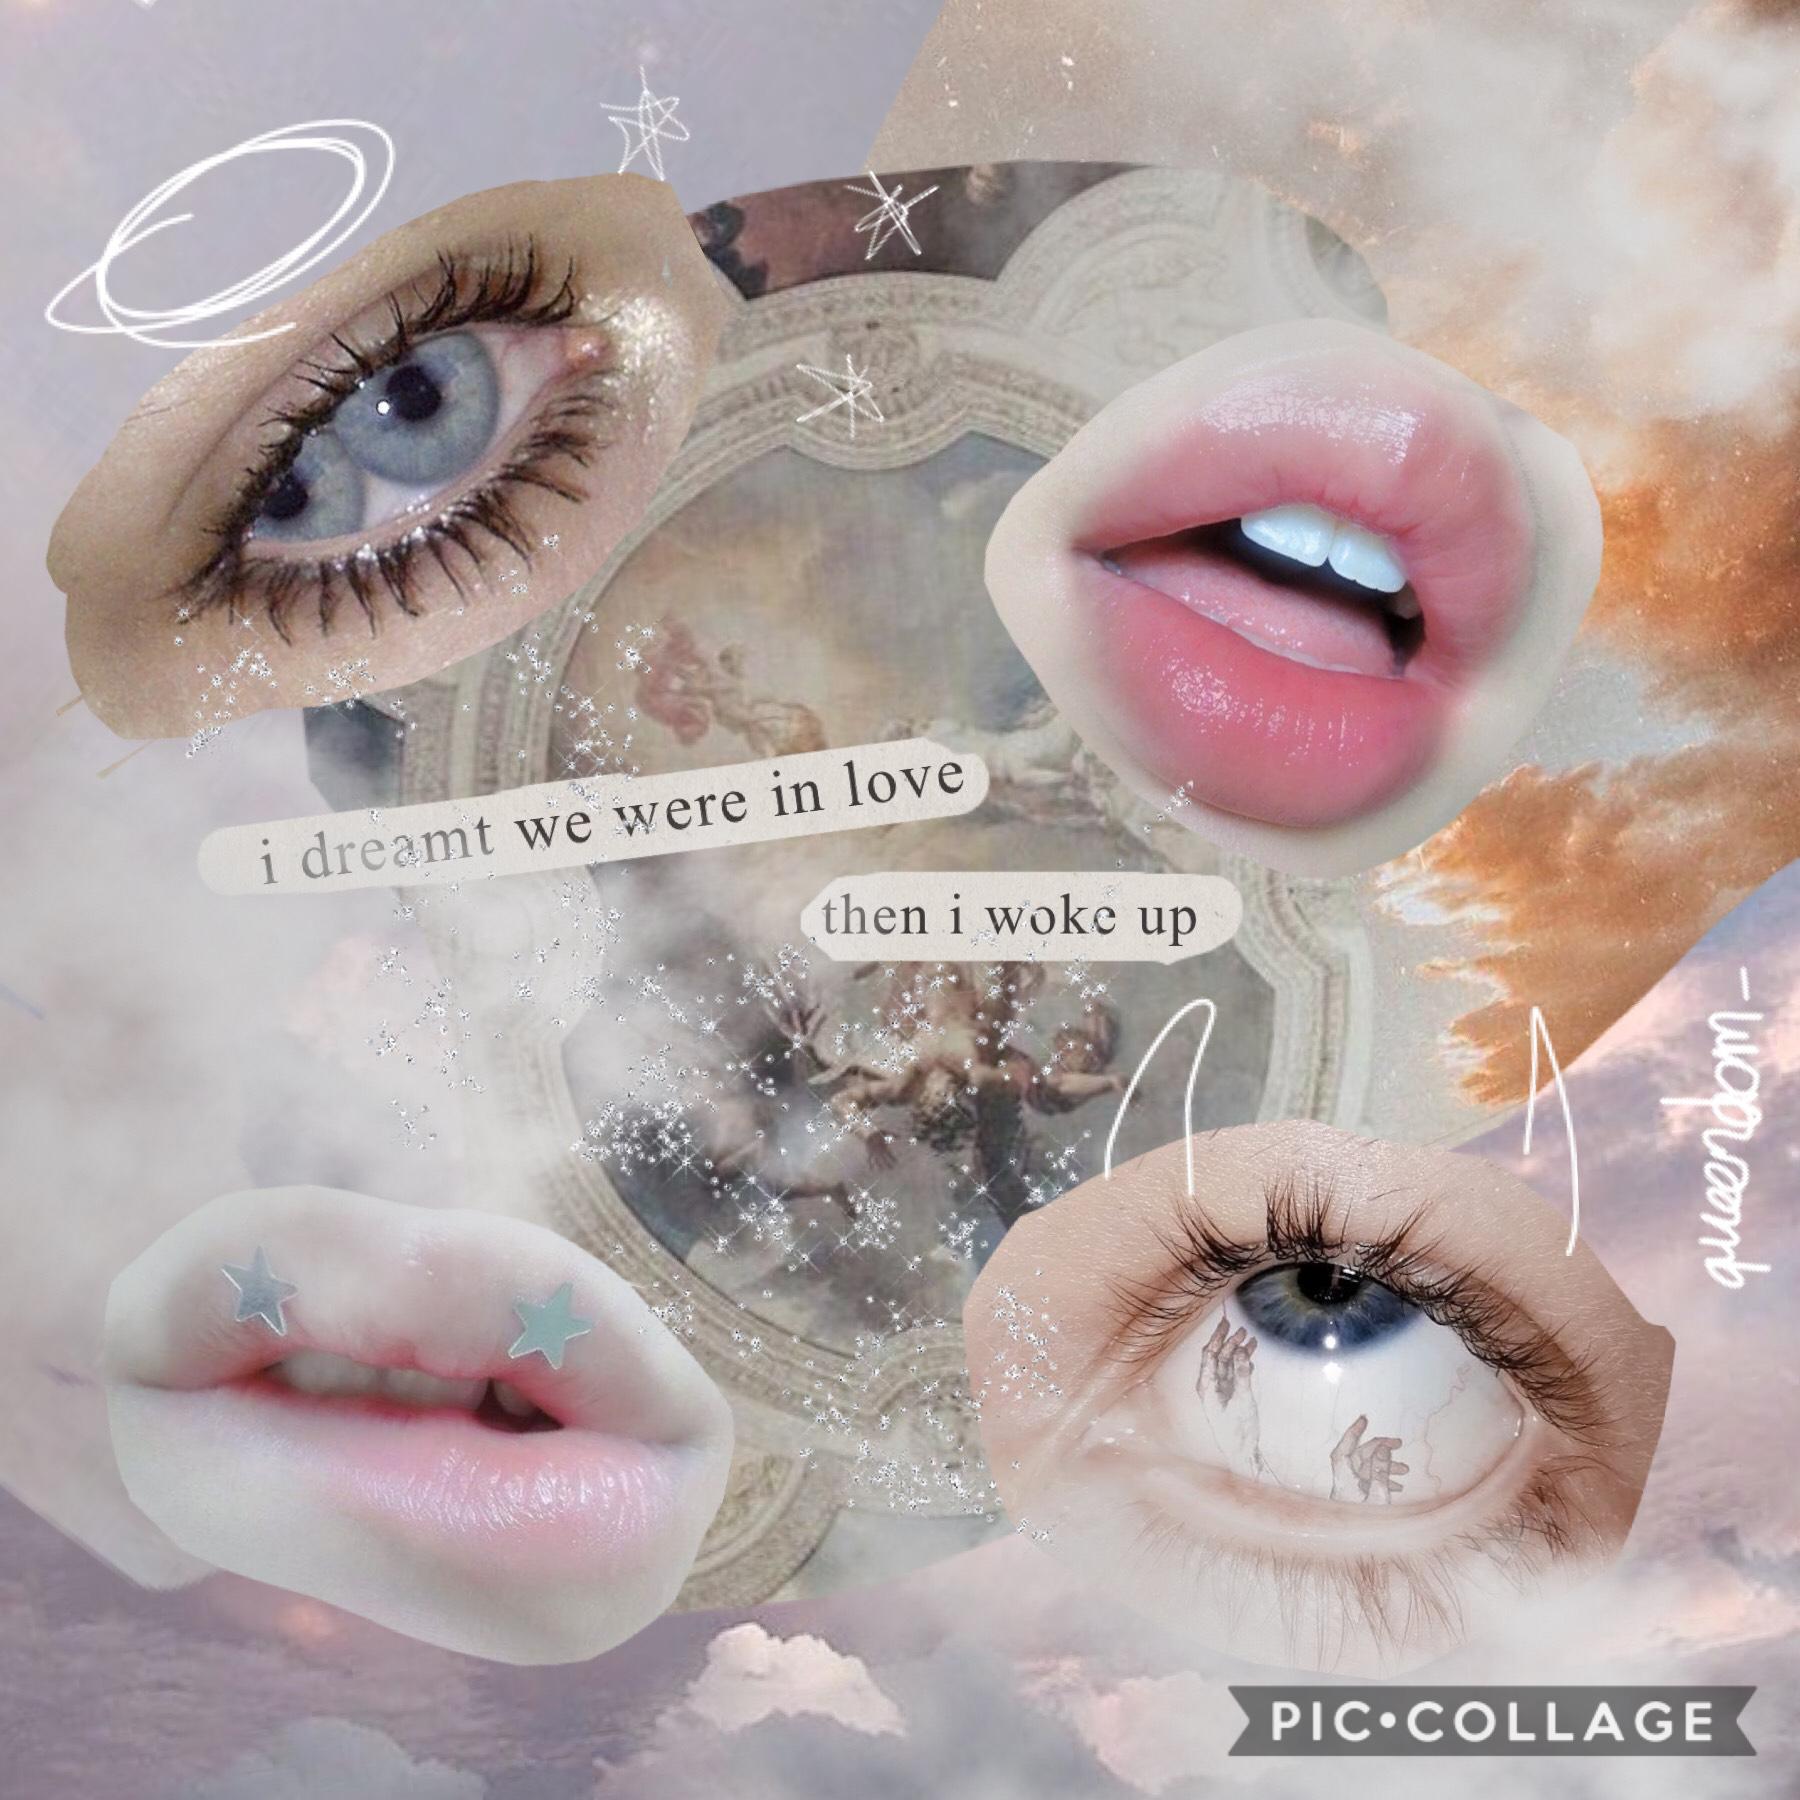 tap!
i am sick :( with a little stomach bug... the worst. but, the bright side is i get to miss school and i got to make this collage for y'all!! 💕 i'm really falling for this softie aesthetic
Q: Grunge or soft?
A: A mix of both honestly ✨🖤🌿